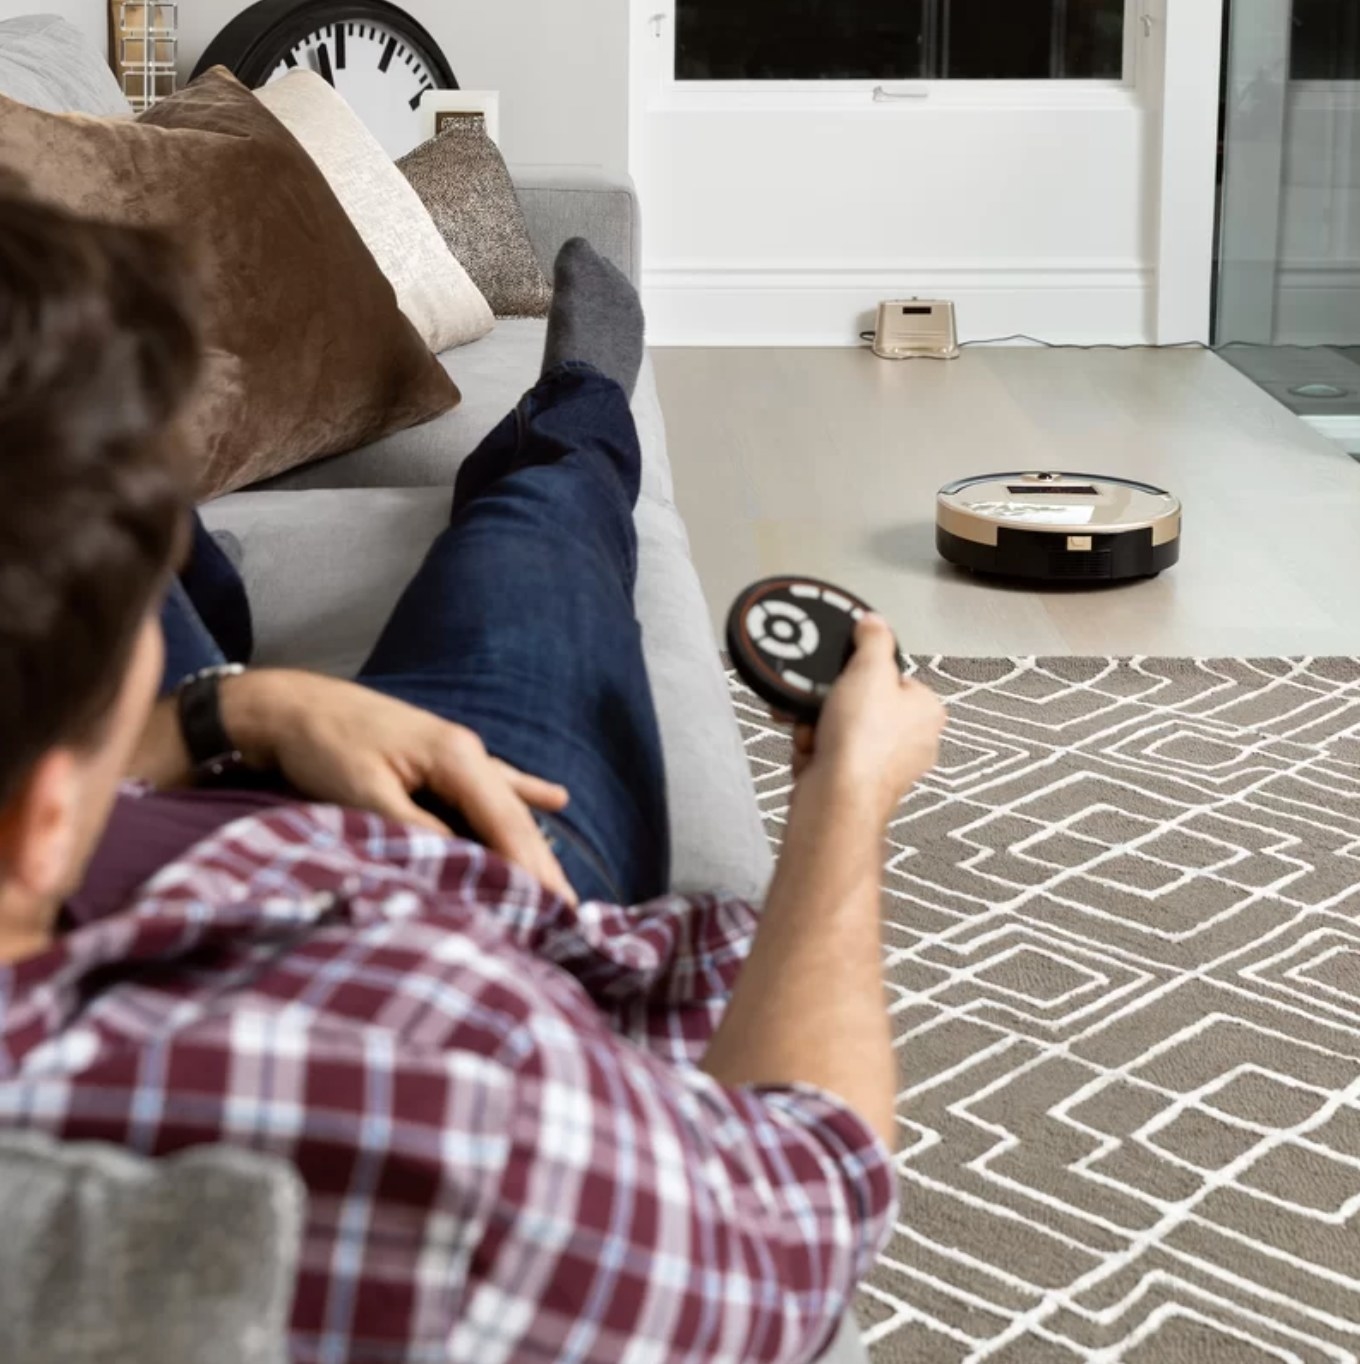 The bObsweep being controlled by a man laying on the couch